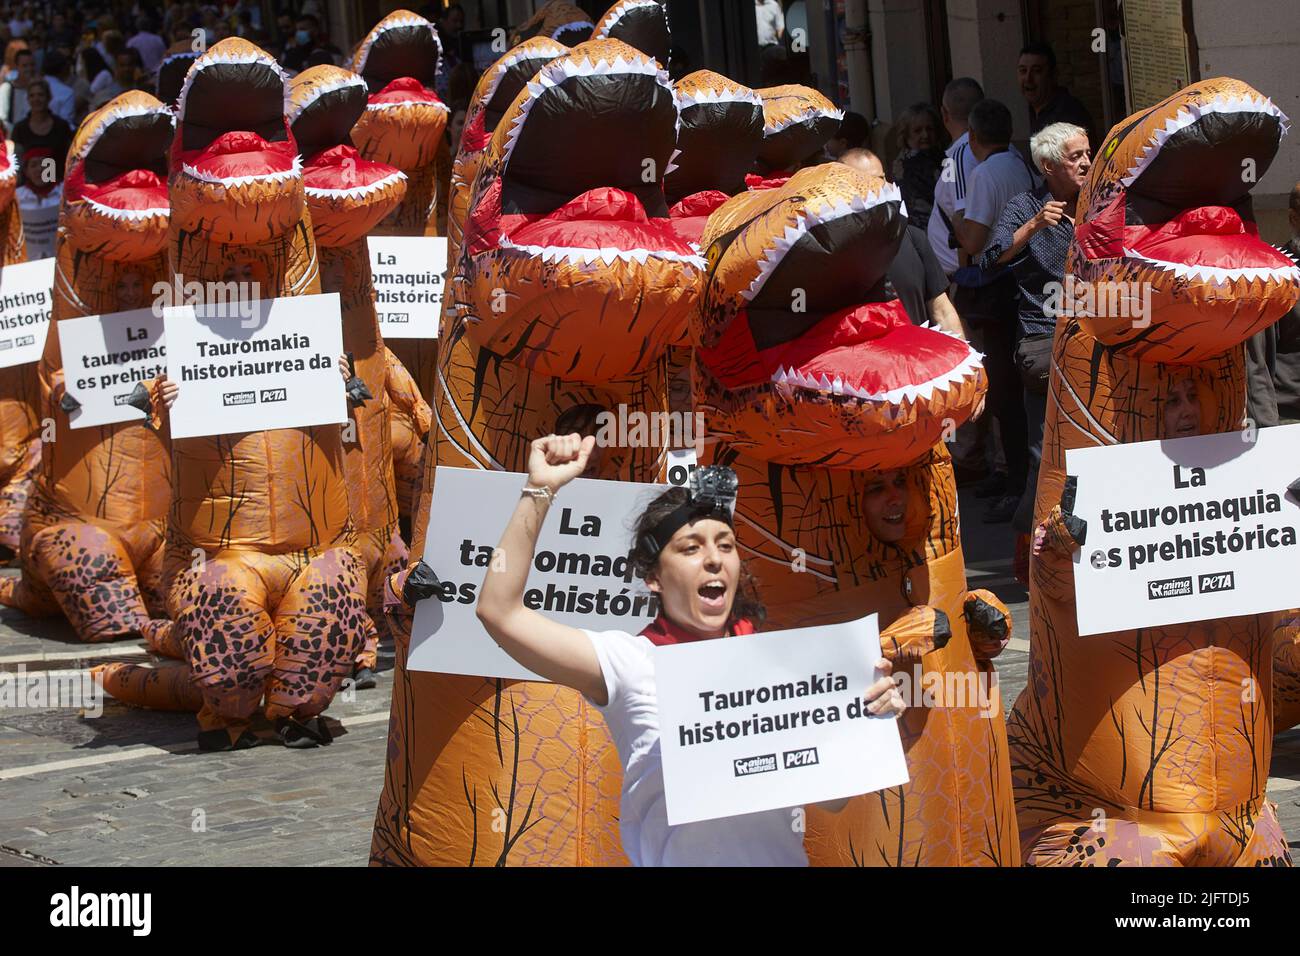 Pamplona. Spain. 5th Jul, 2022. The organizations in defense of animals 'AnimaNaturalis' and 'PETA' organize a protest against bullfighting in Pamplona in the course of the running of the bulls under the slogan 'Bullfighting is prehistoric' on the day before the start of the San fermin Festival. Credit: Iñigo Alzugaray/Alamy Live News Stock Photo